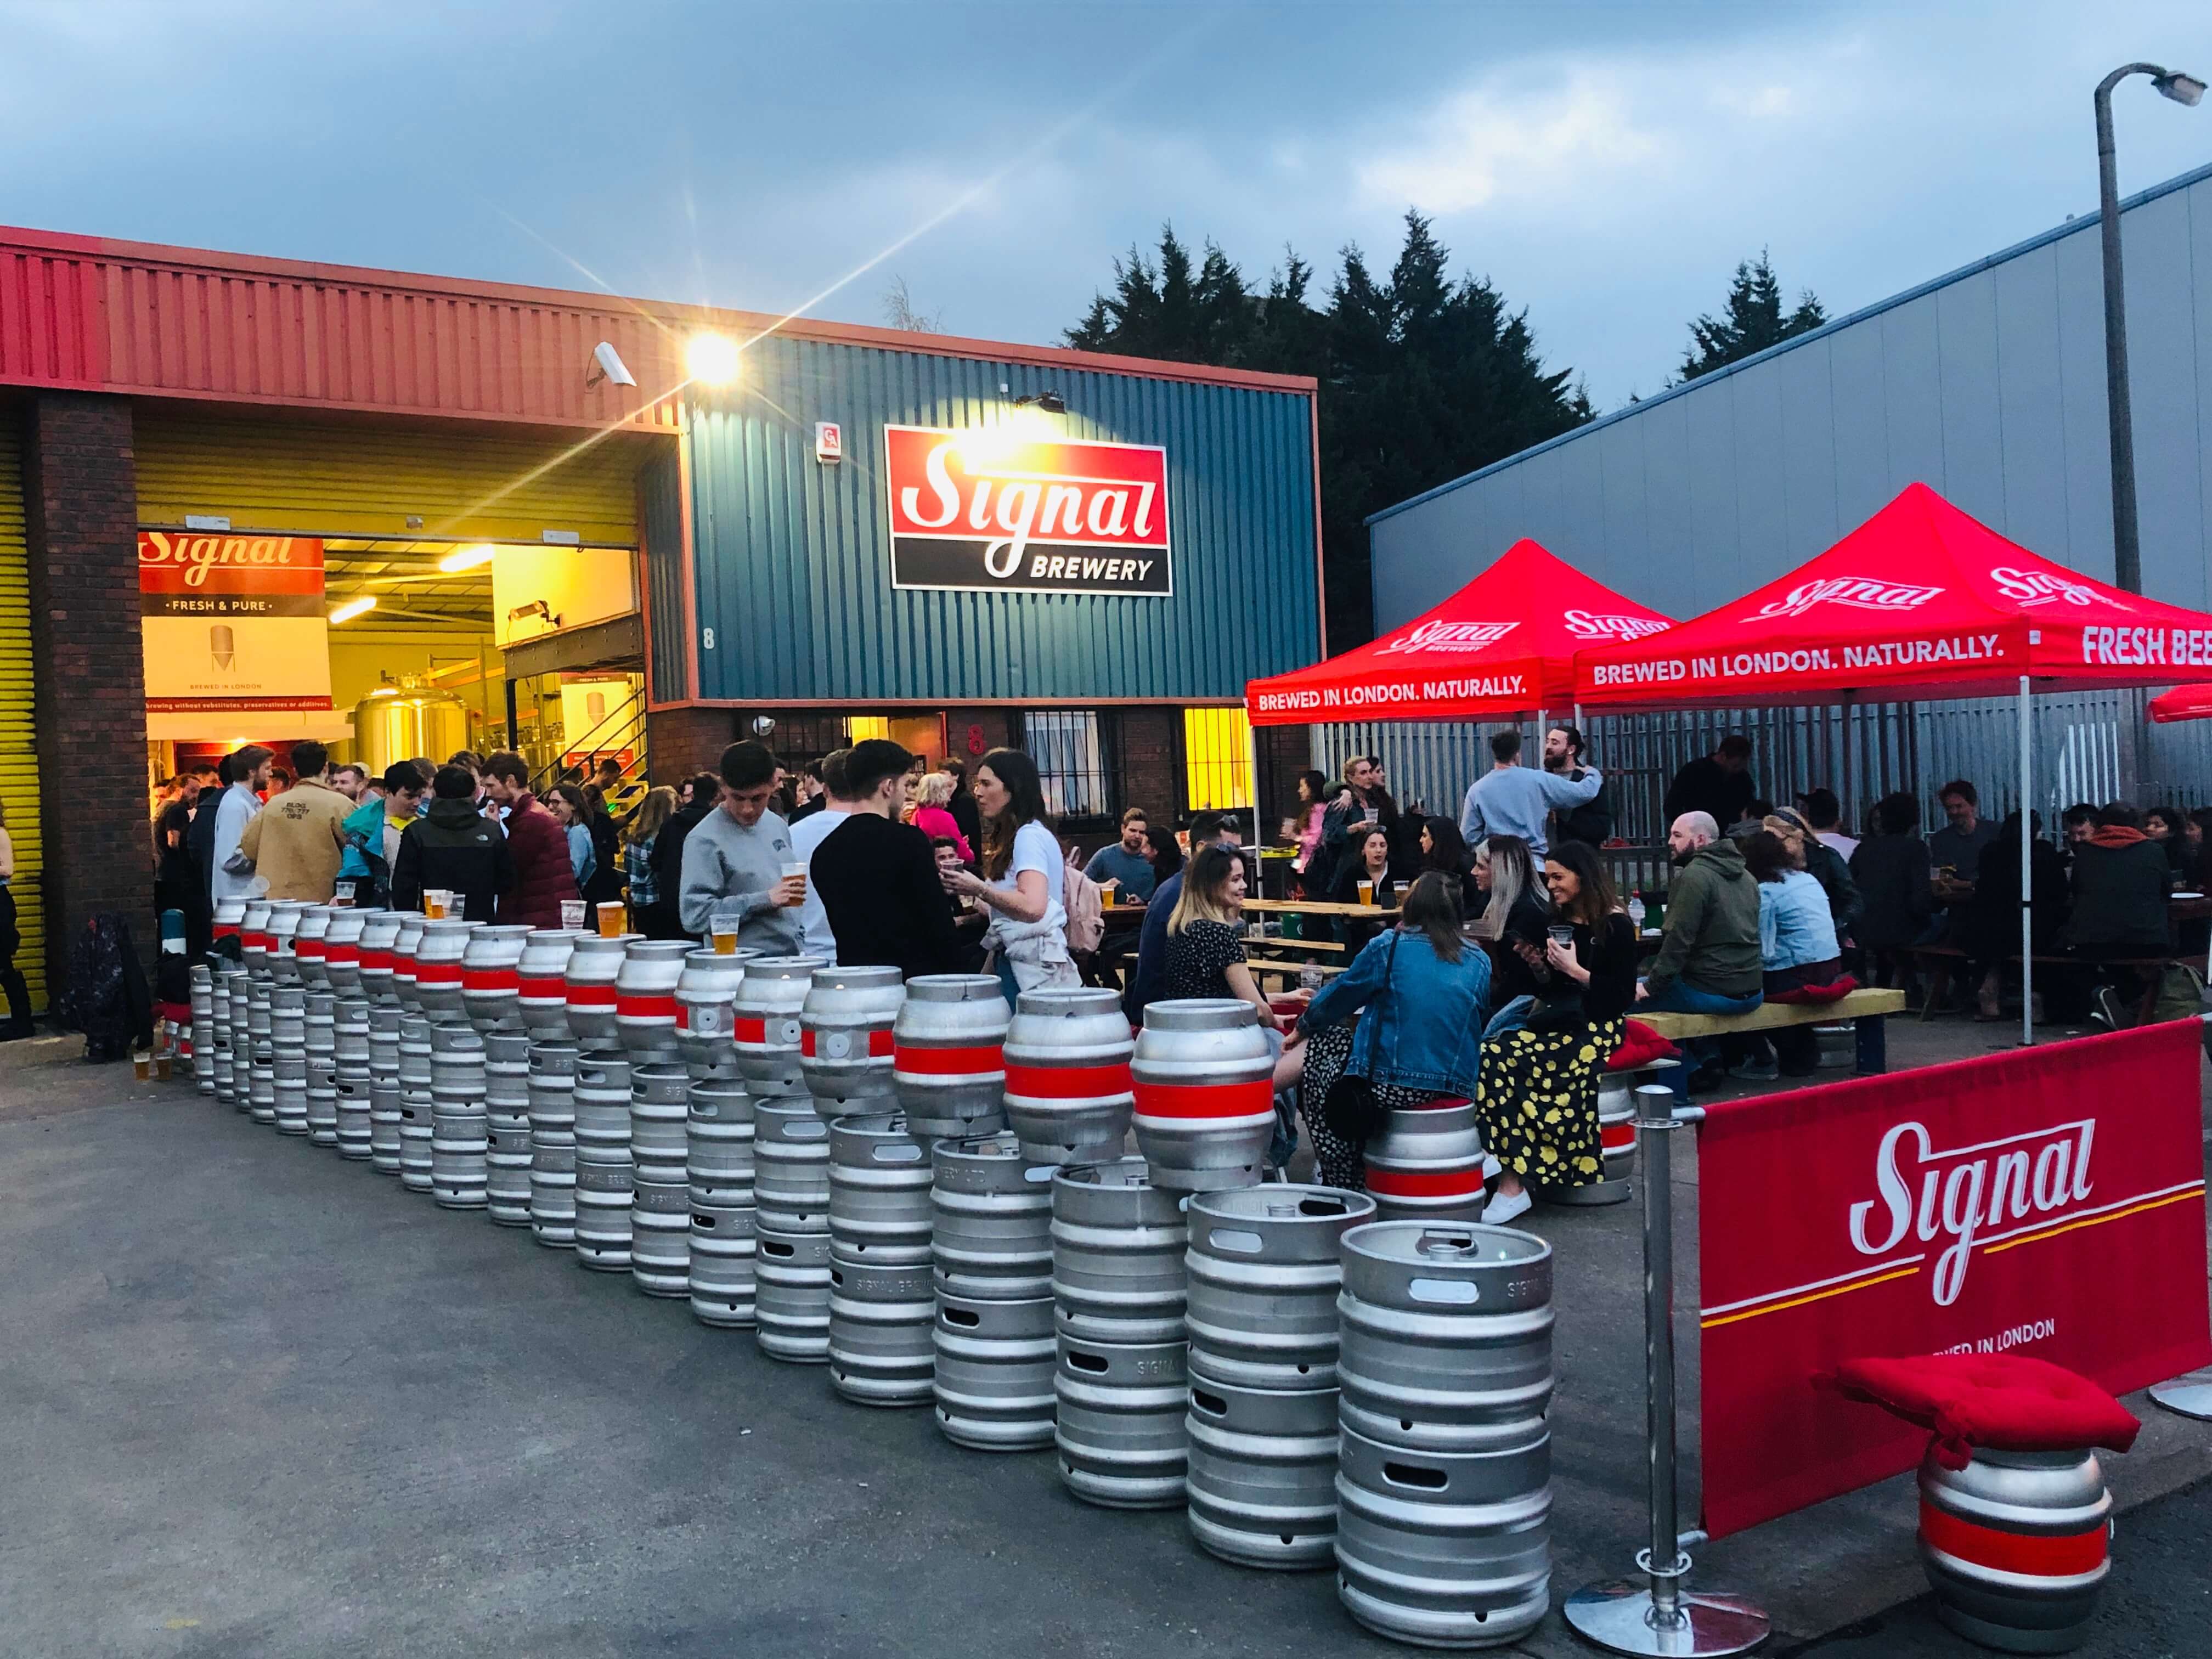 Evening outdoor drinks at Signal Brewery & Taproom, Croydon, South London